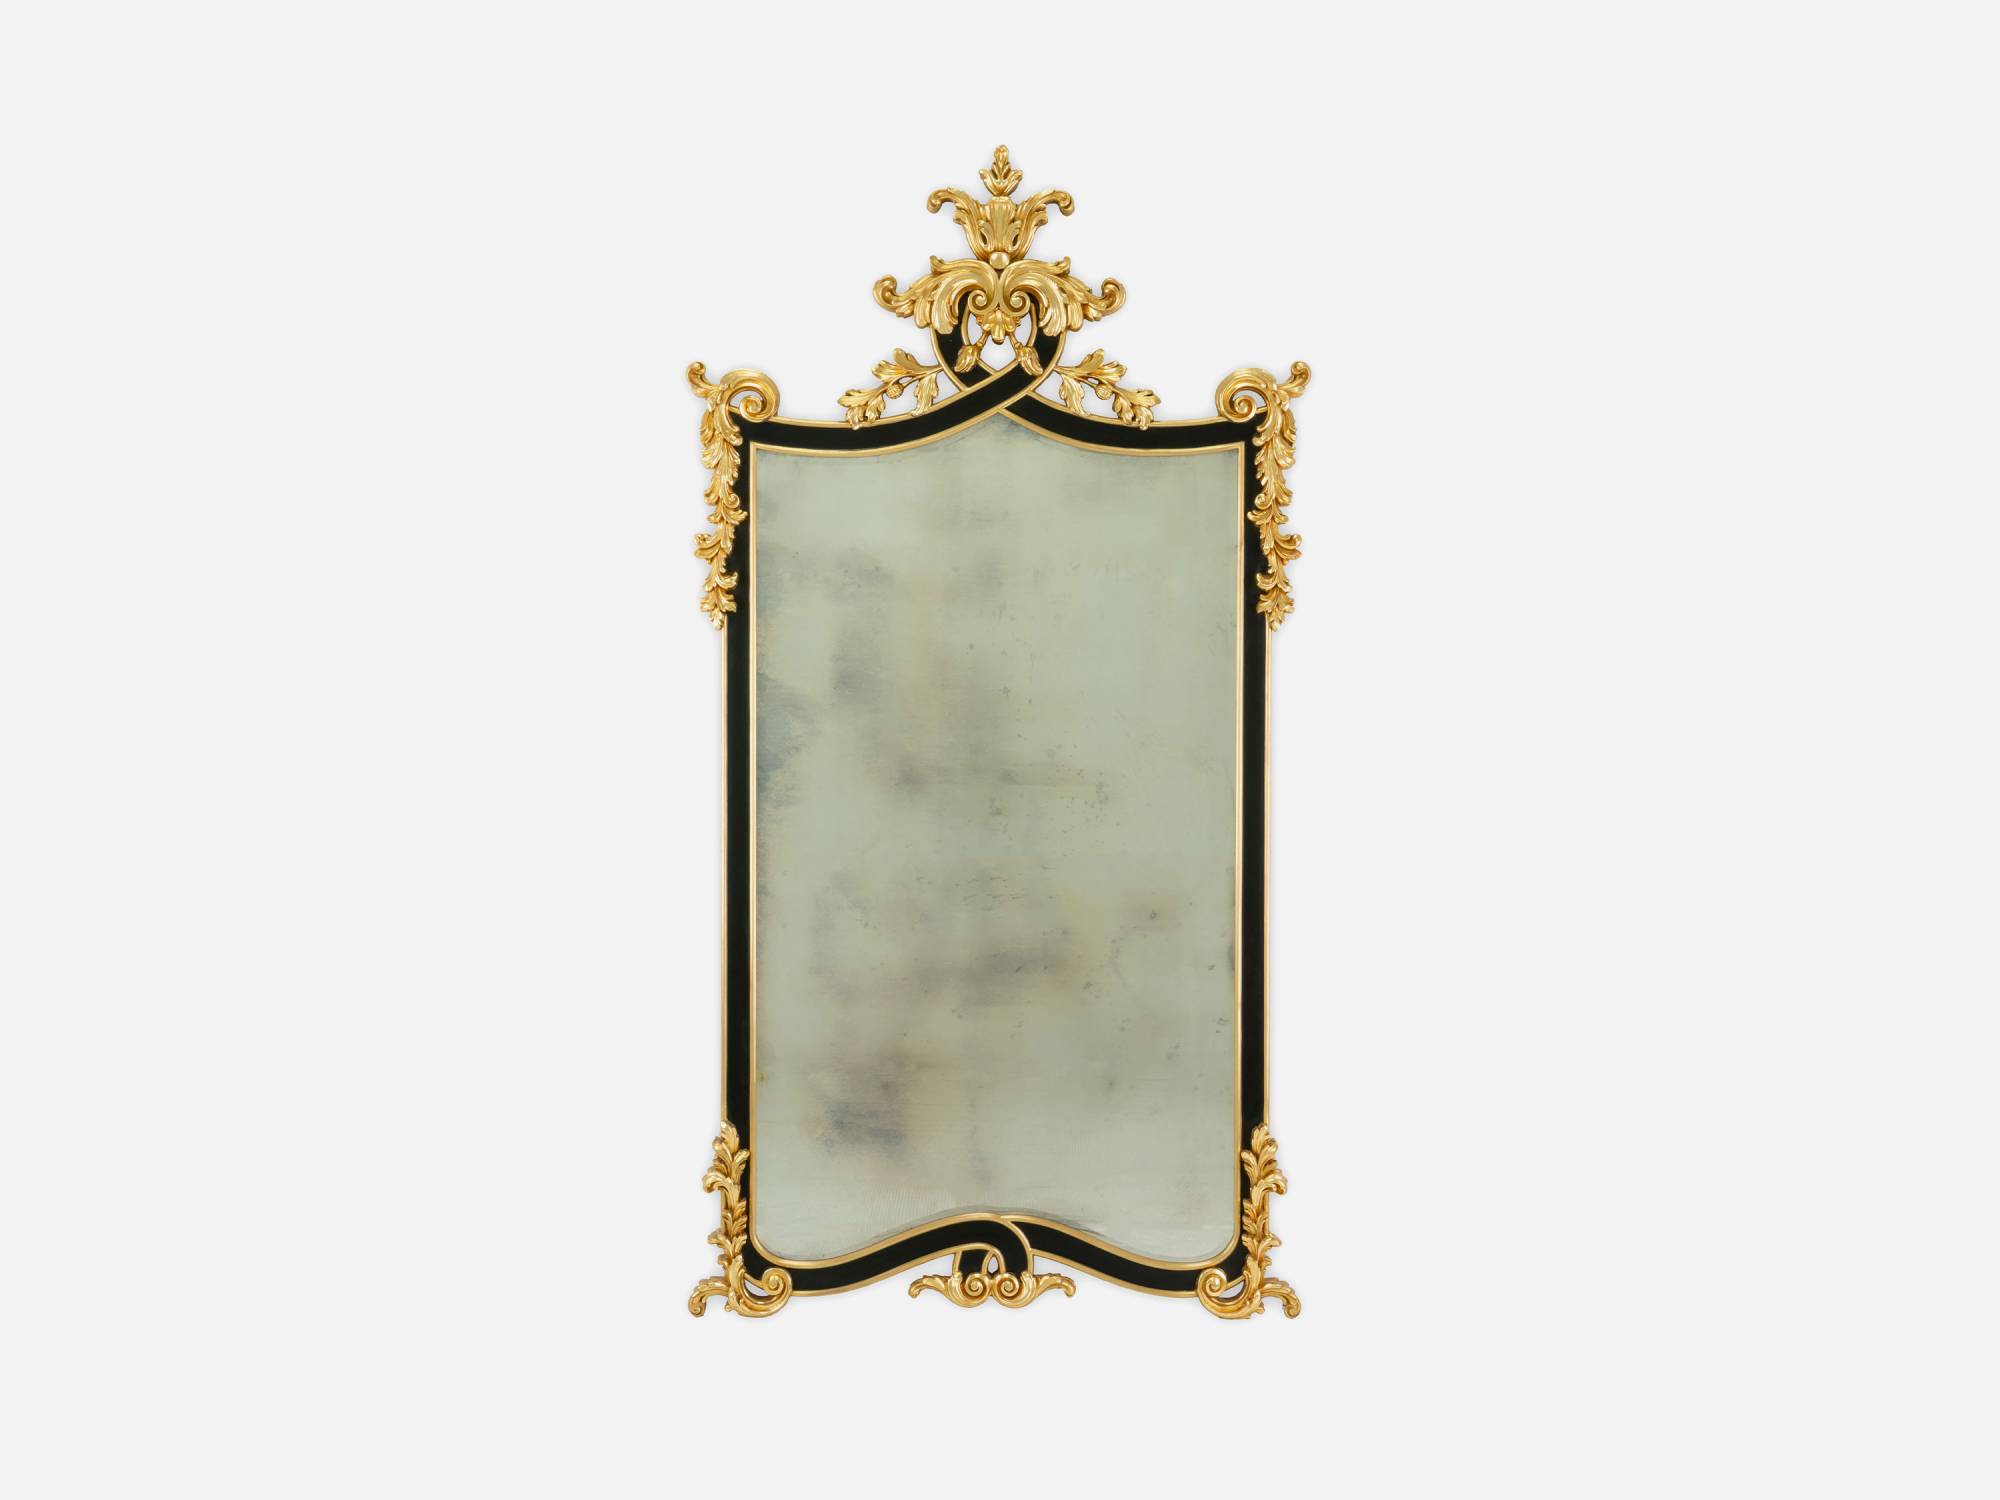 ART. 2176 - C.G. Capelletti quality furniture with made in Italy contemporary Mirrorboards